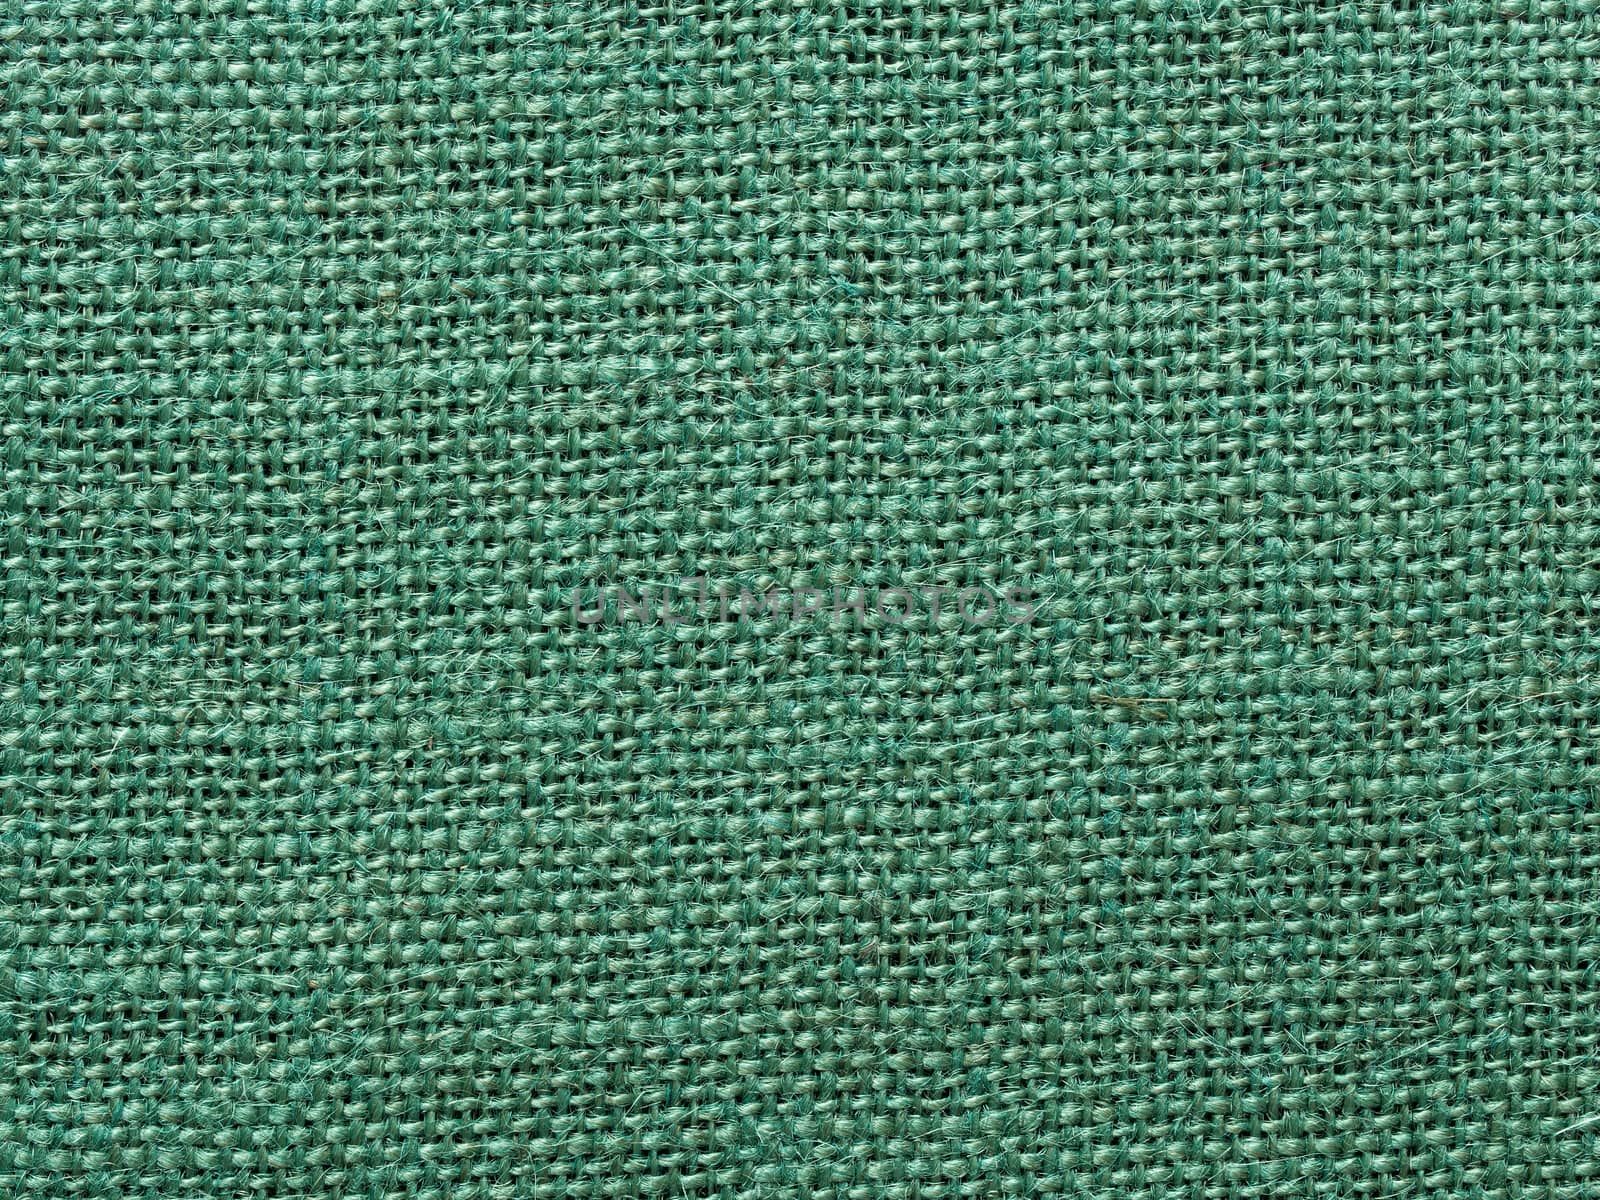 green burlap fabric texture background by zkruger